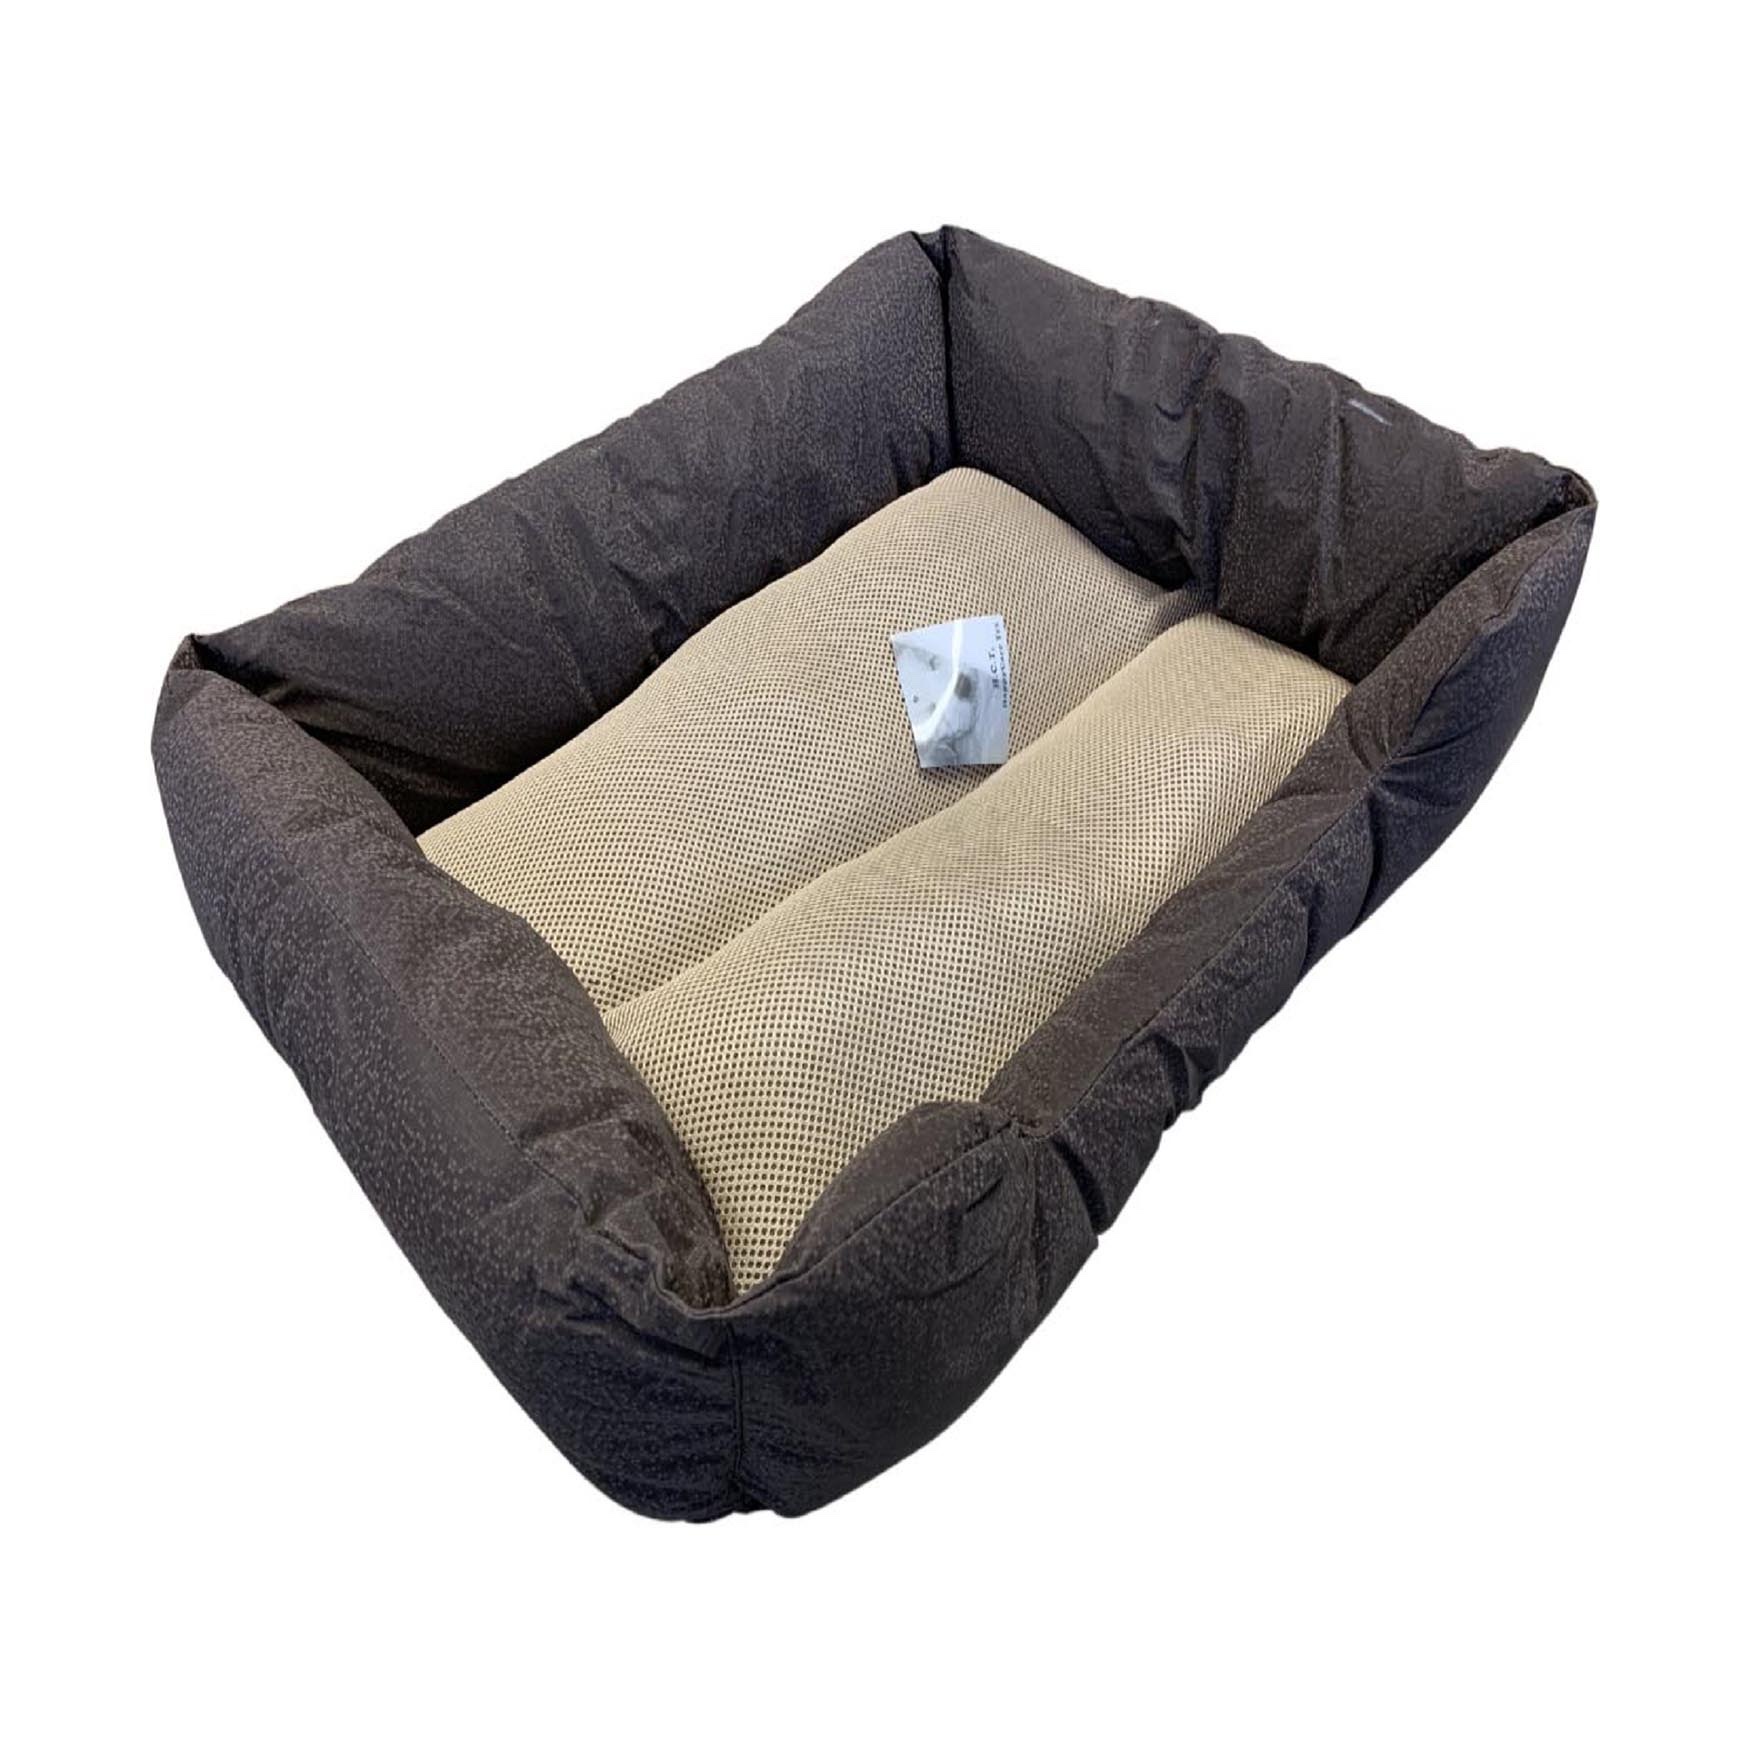 SELF COOLING EMBOSSED FAUX LEATHER DOG BED- BROWN Medium size, BROWN